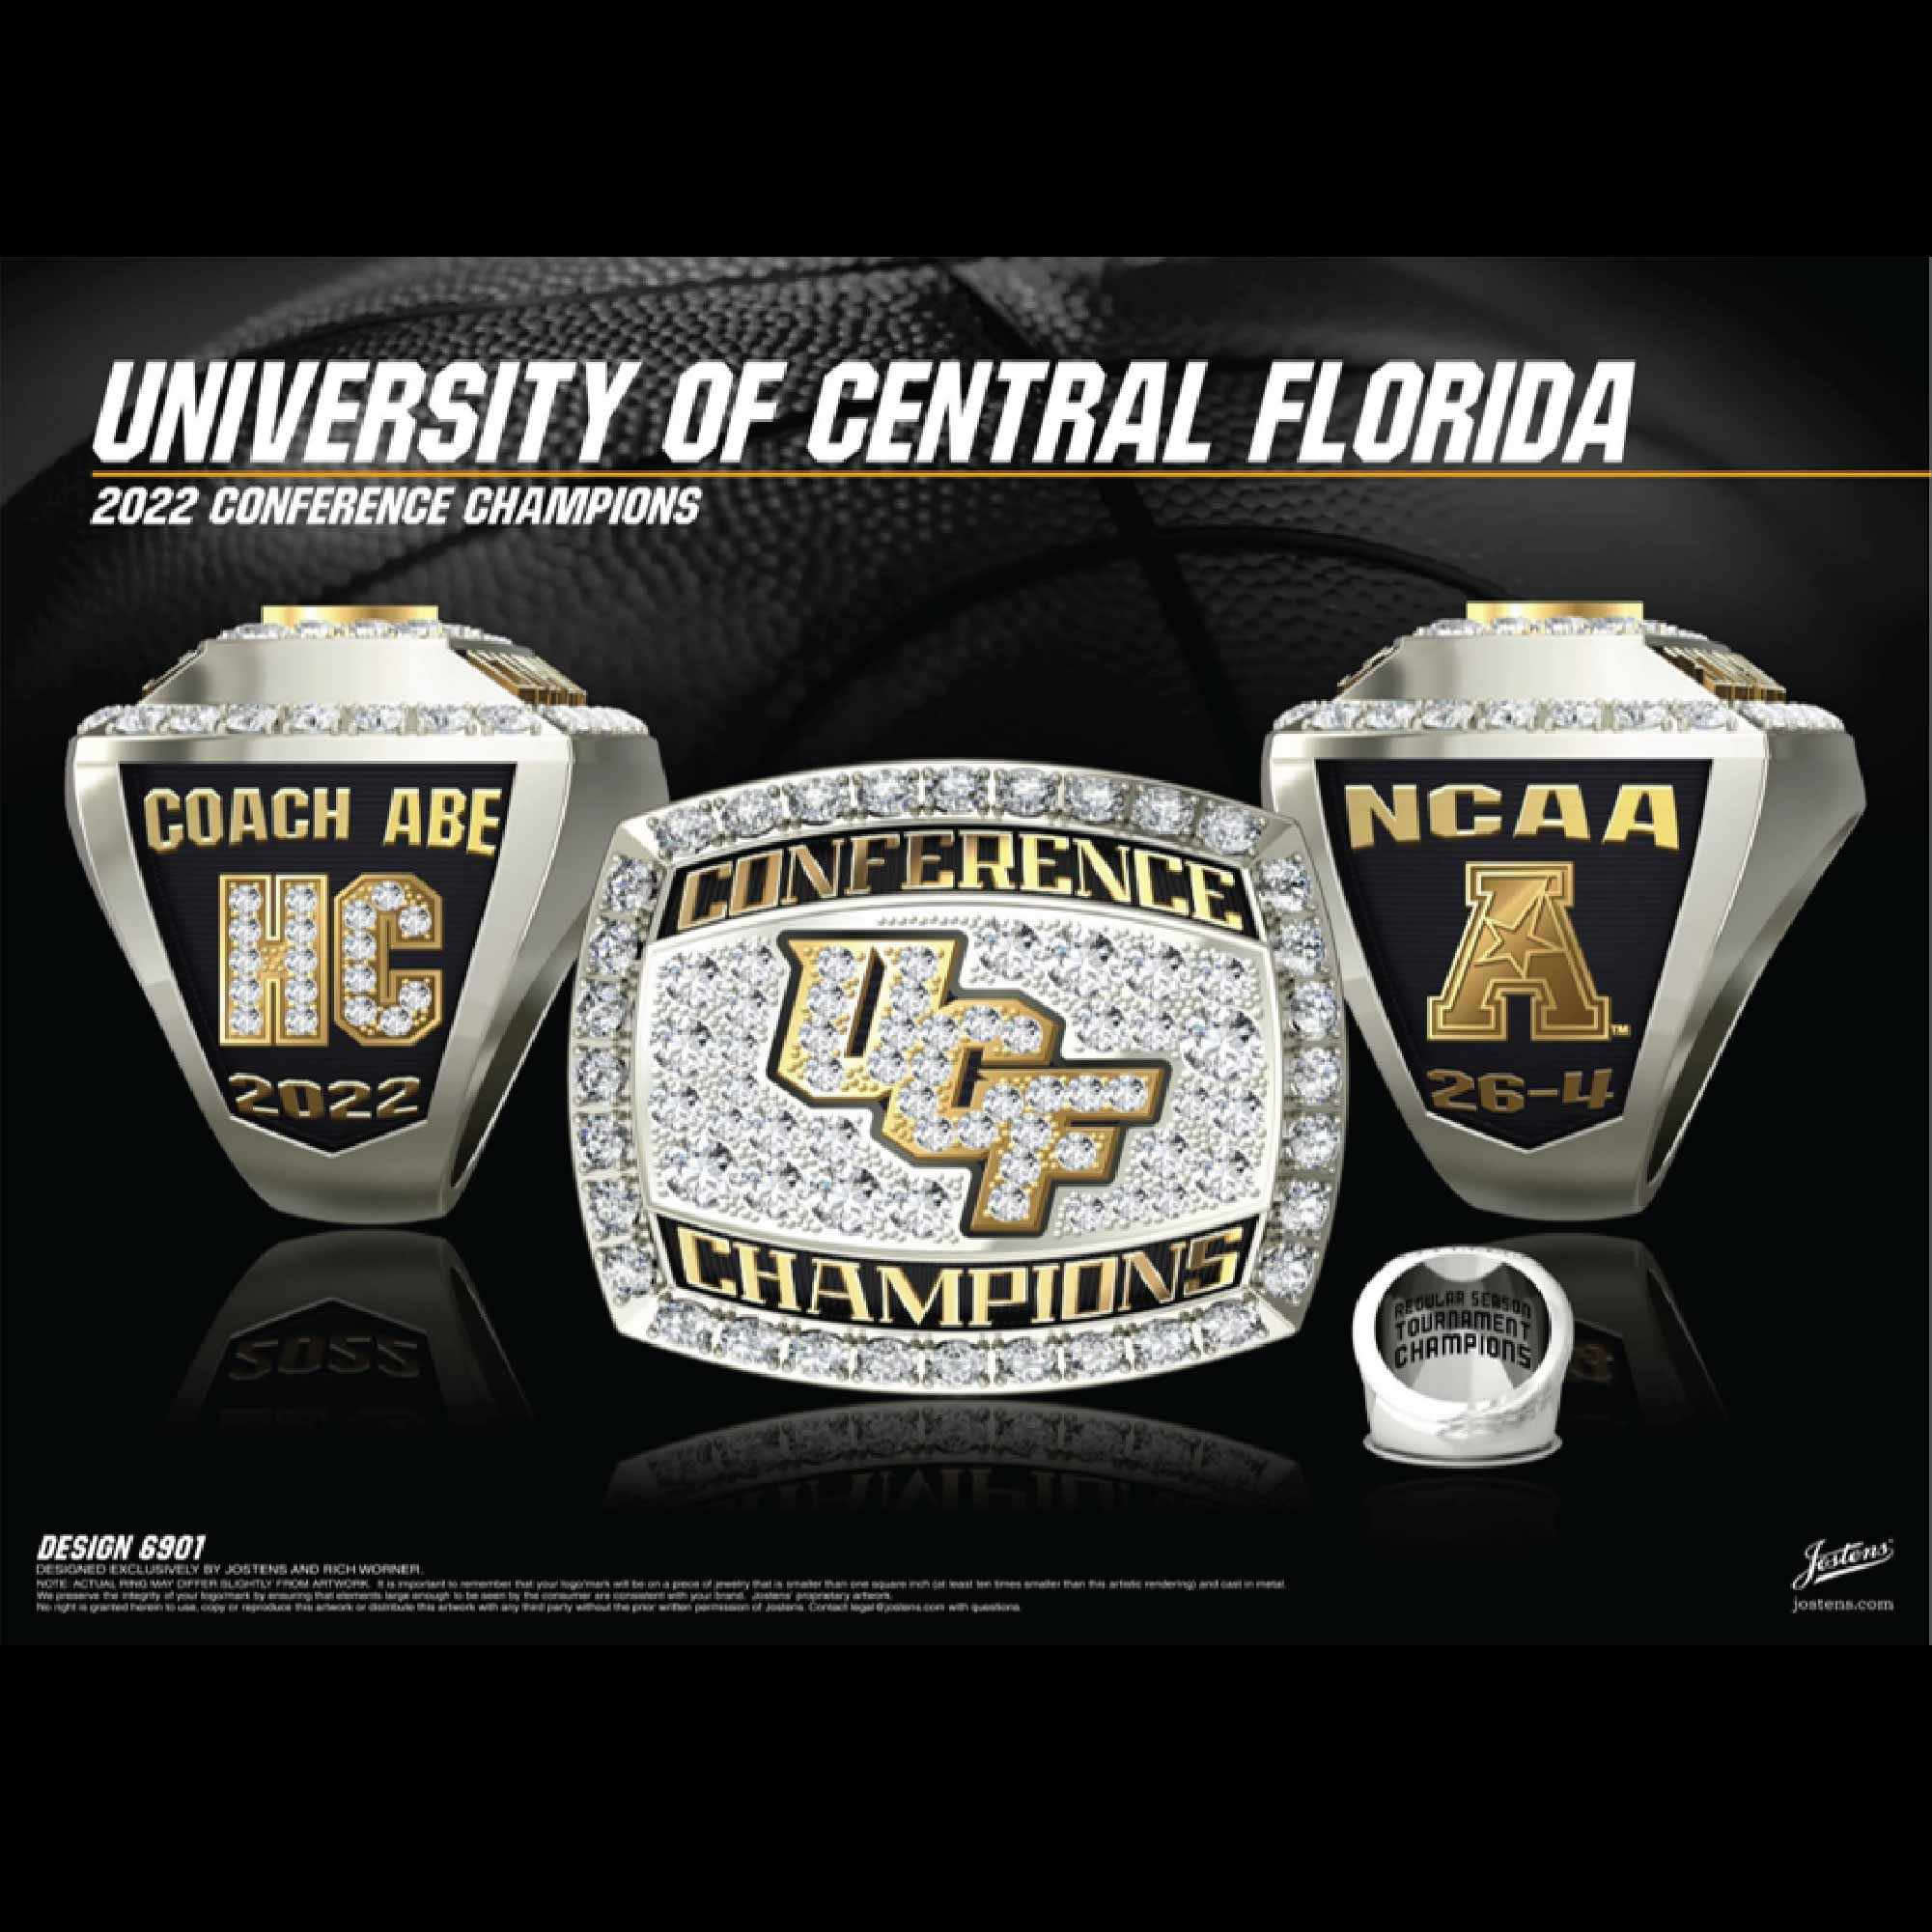 University of Central Florida Women's Basketball 2022 Conference Championship Ring